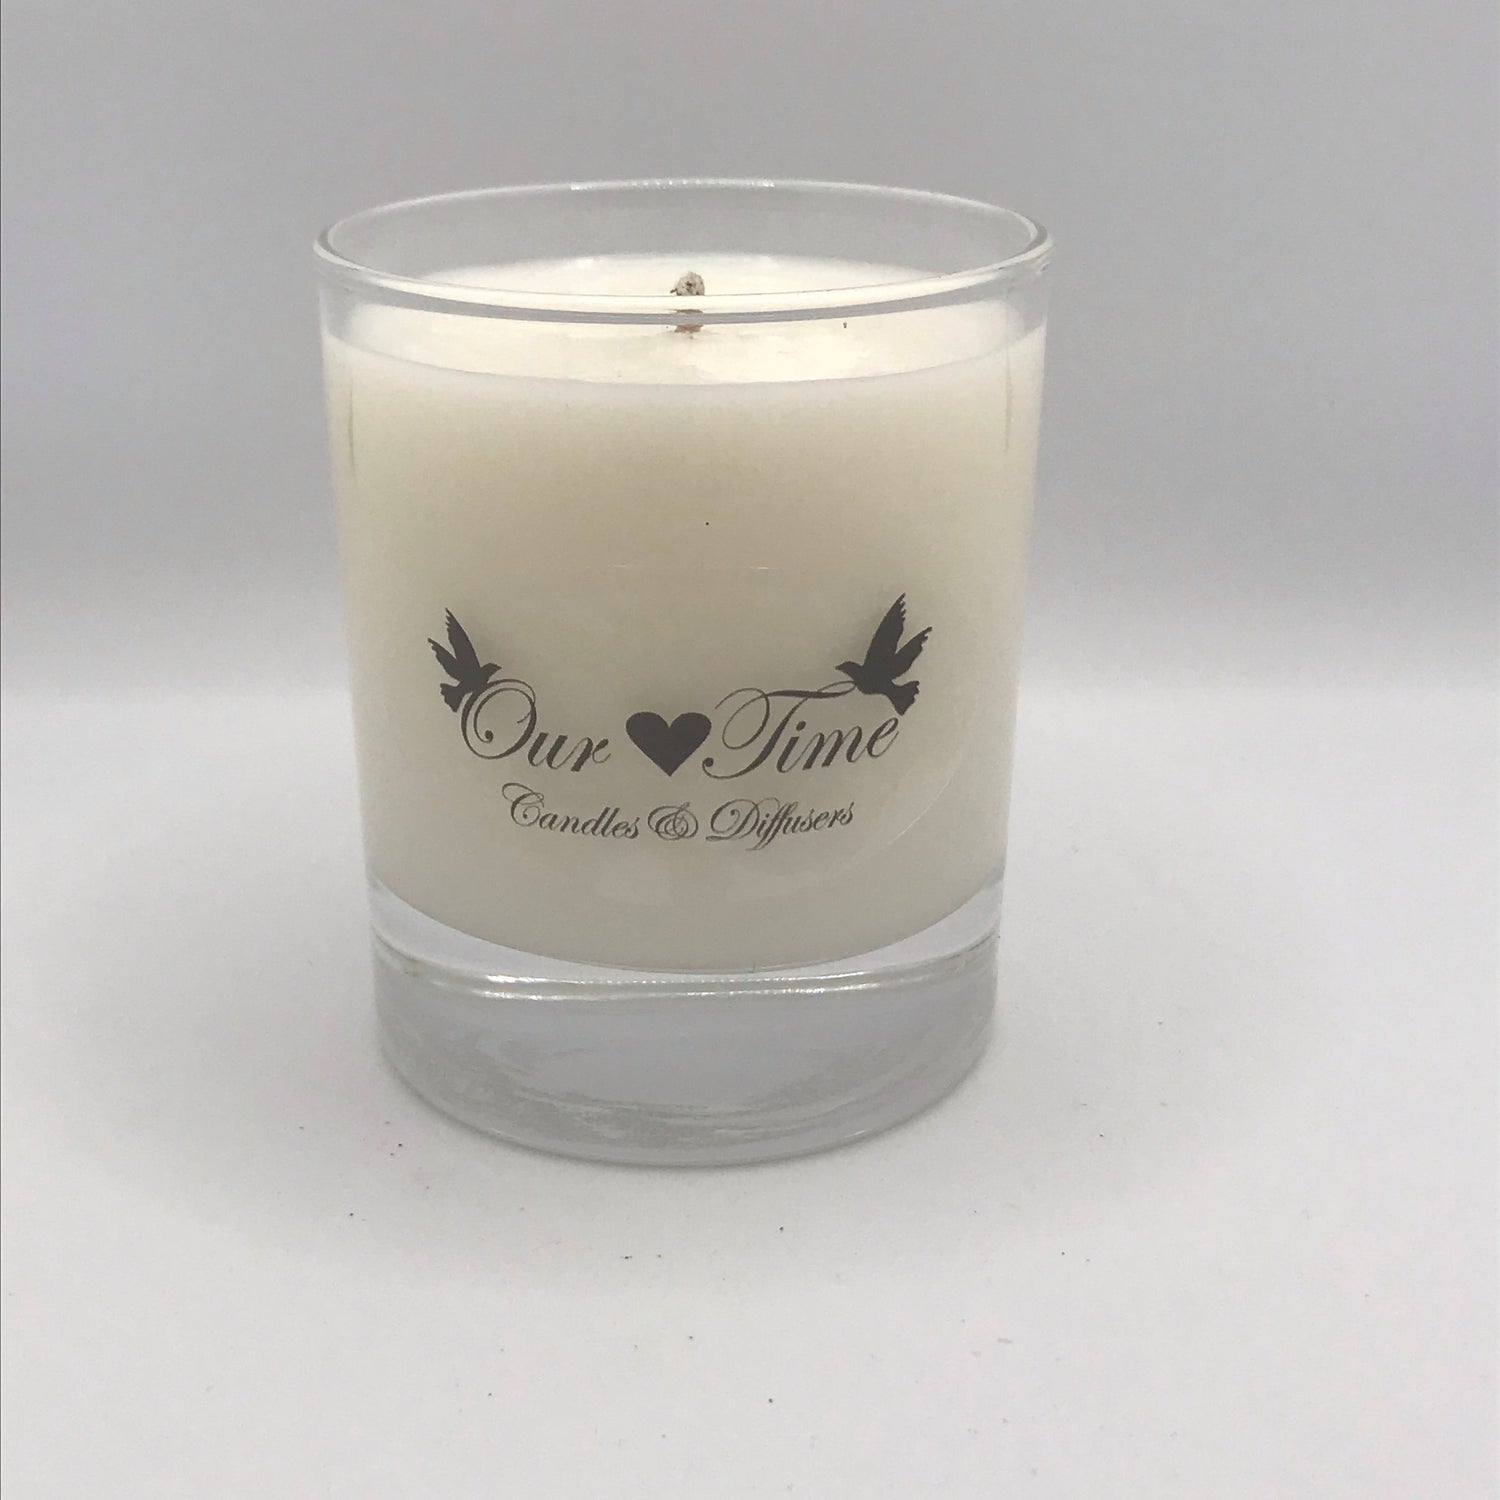 Medium Scented Wax Filled Candle from Our Time Candles and Diffusers